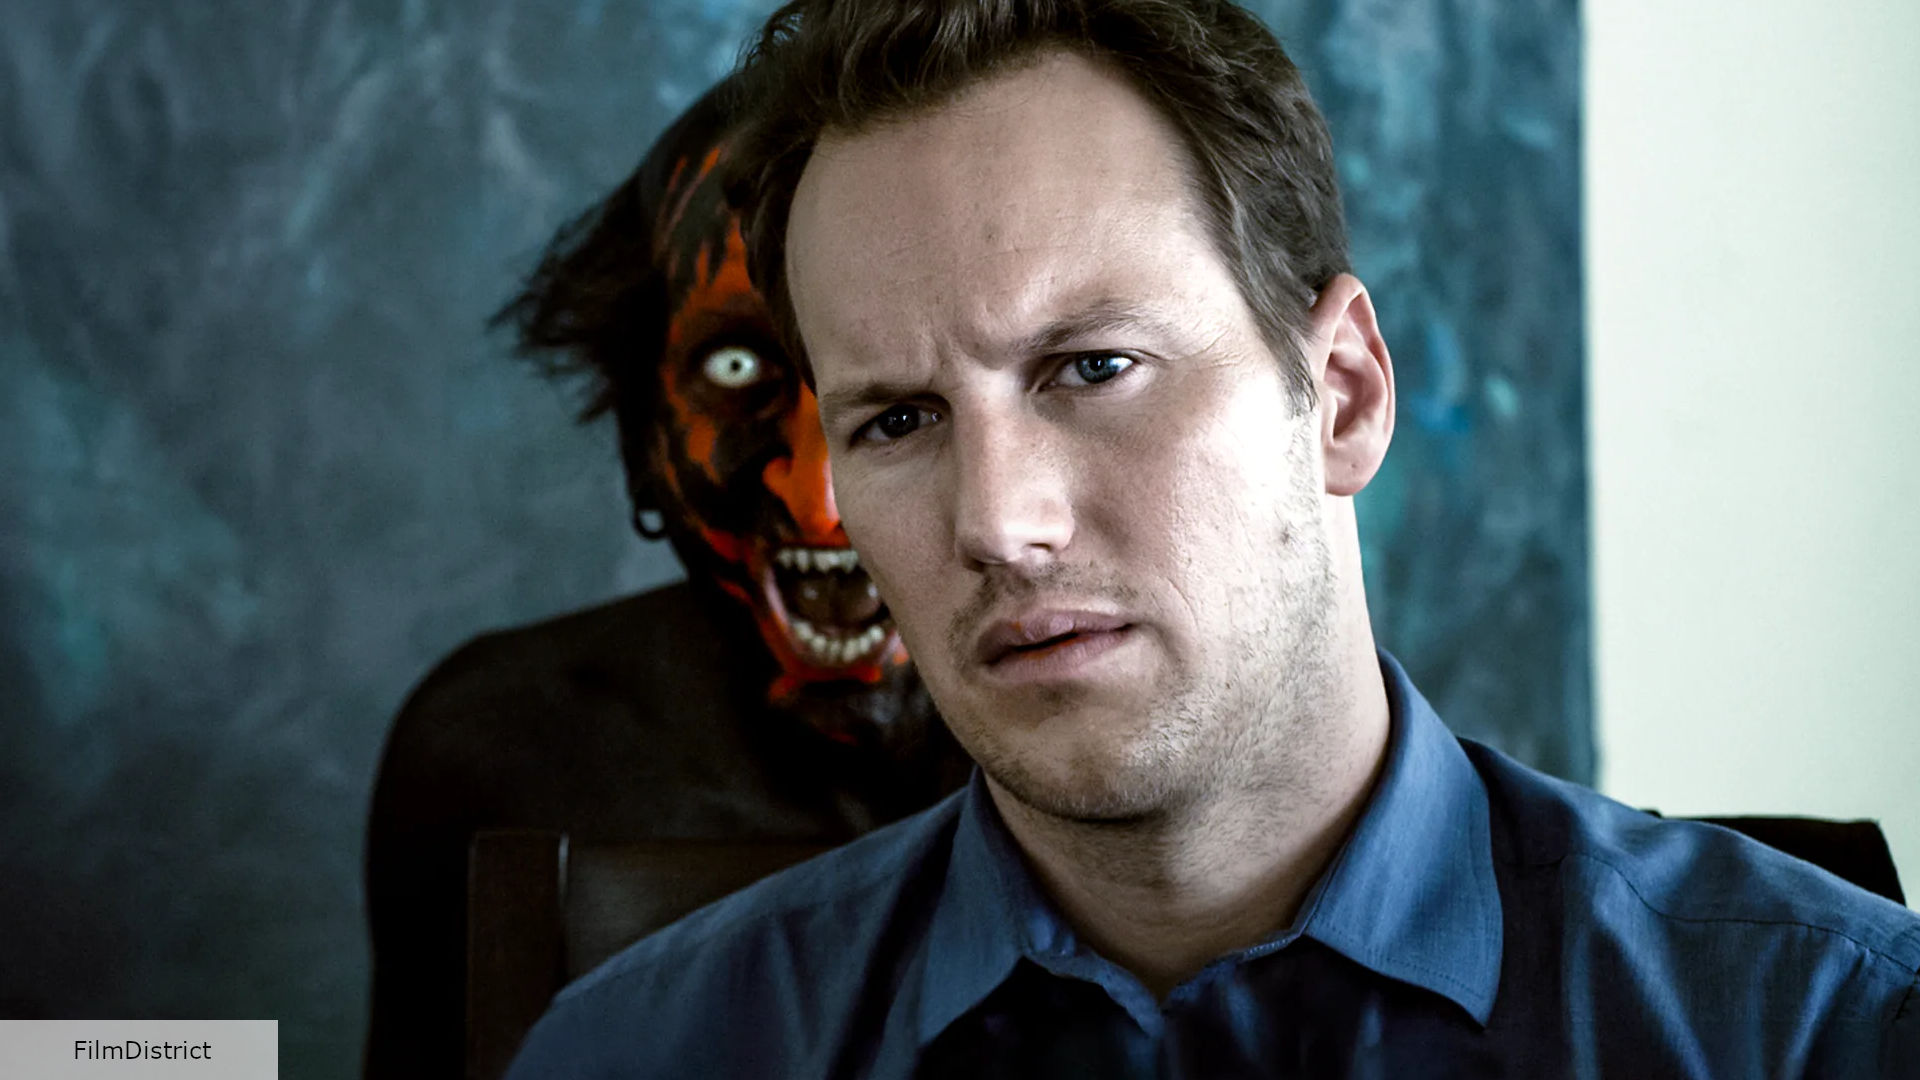 Insidious 5 release date, cast, plot details, and more The Digital Fix